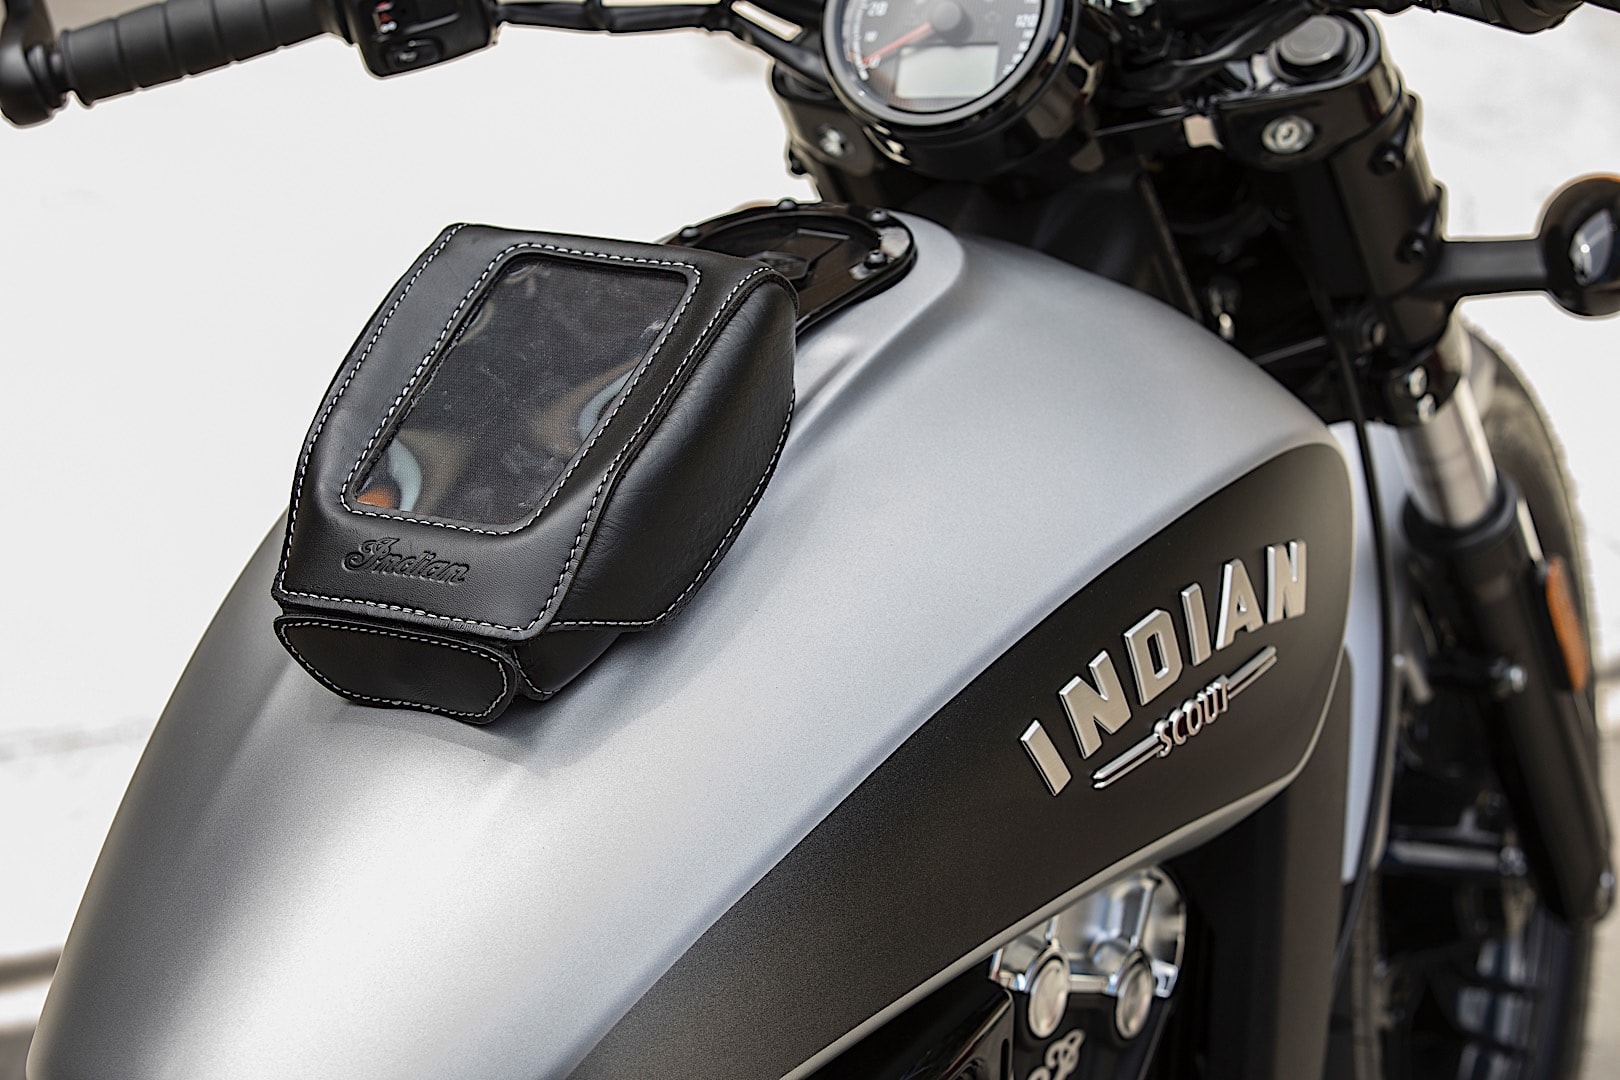 2018 Indian Scout Bobber Gets a Bunch Cool New Accessories